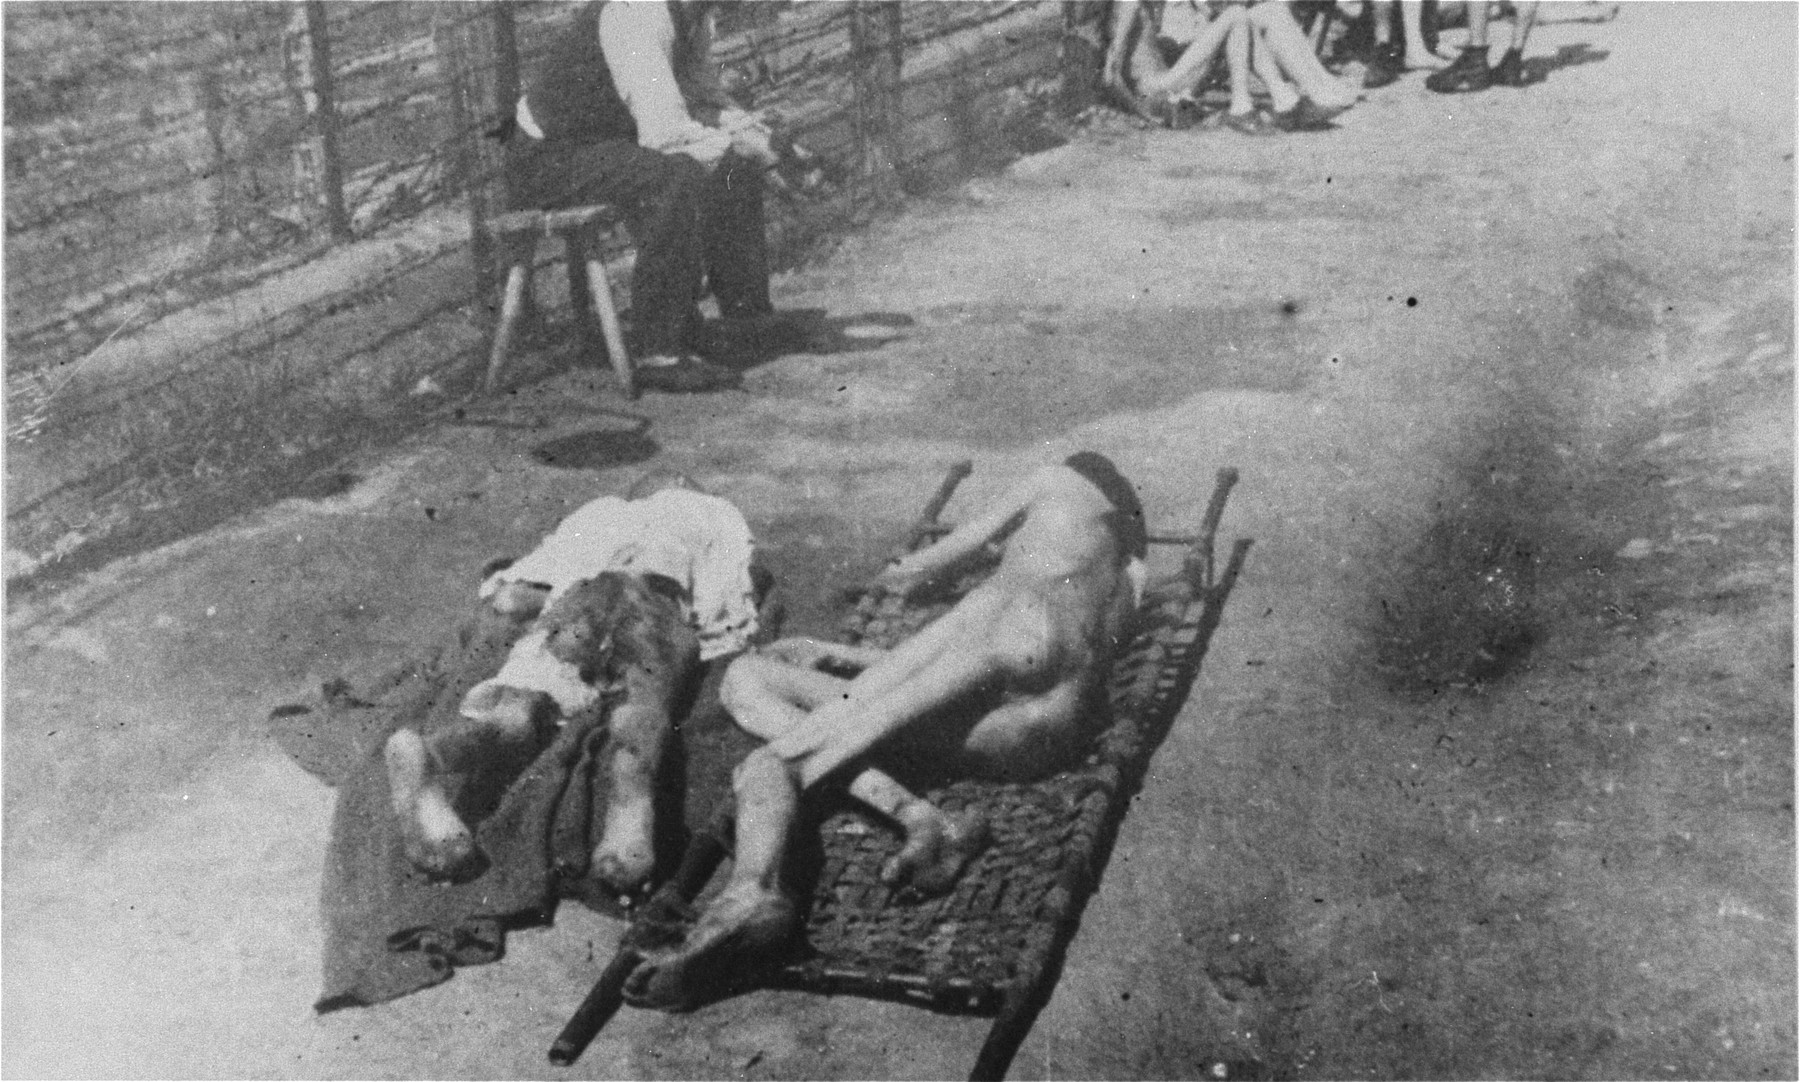 Two bodies lie on stretchers in Mauthausen after liberation.